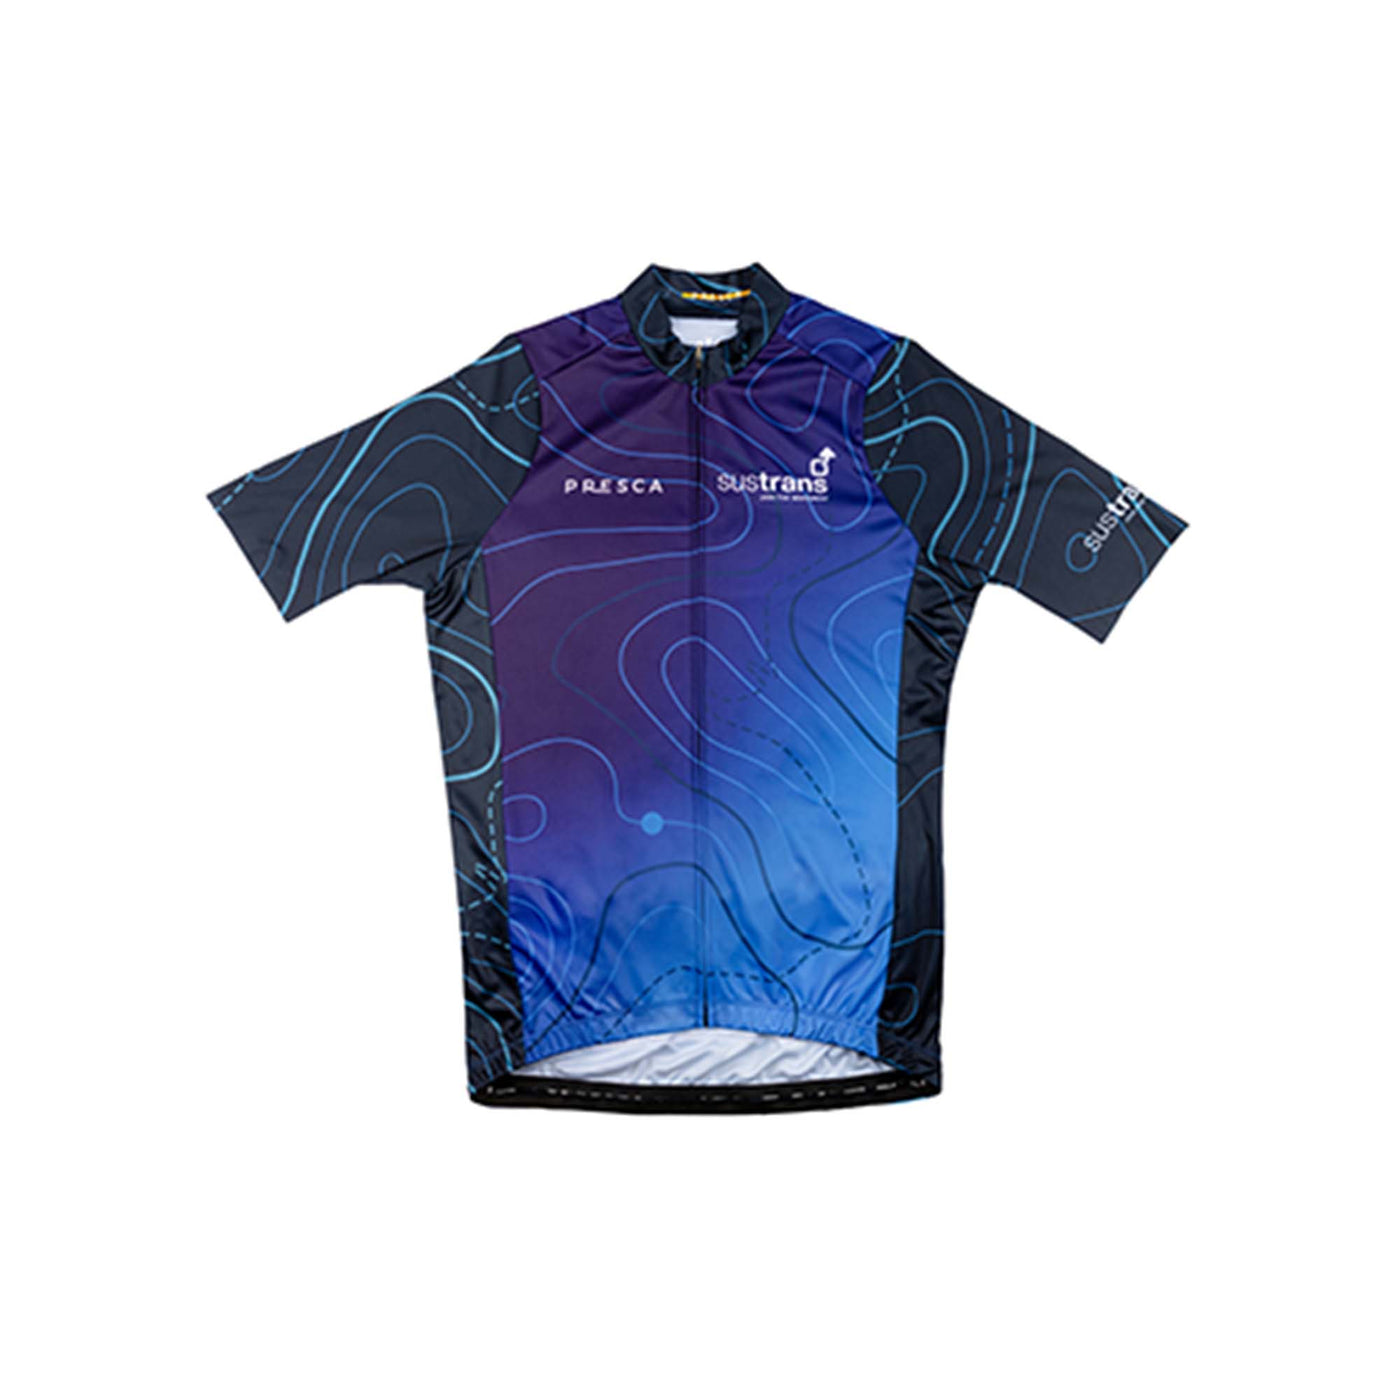 Sustrans women's cycling jersey made by Presca. Blue cycling jersey with contour themed pattern.